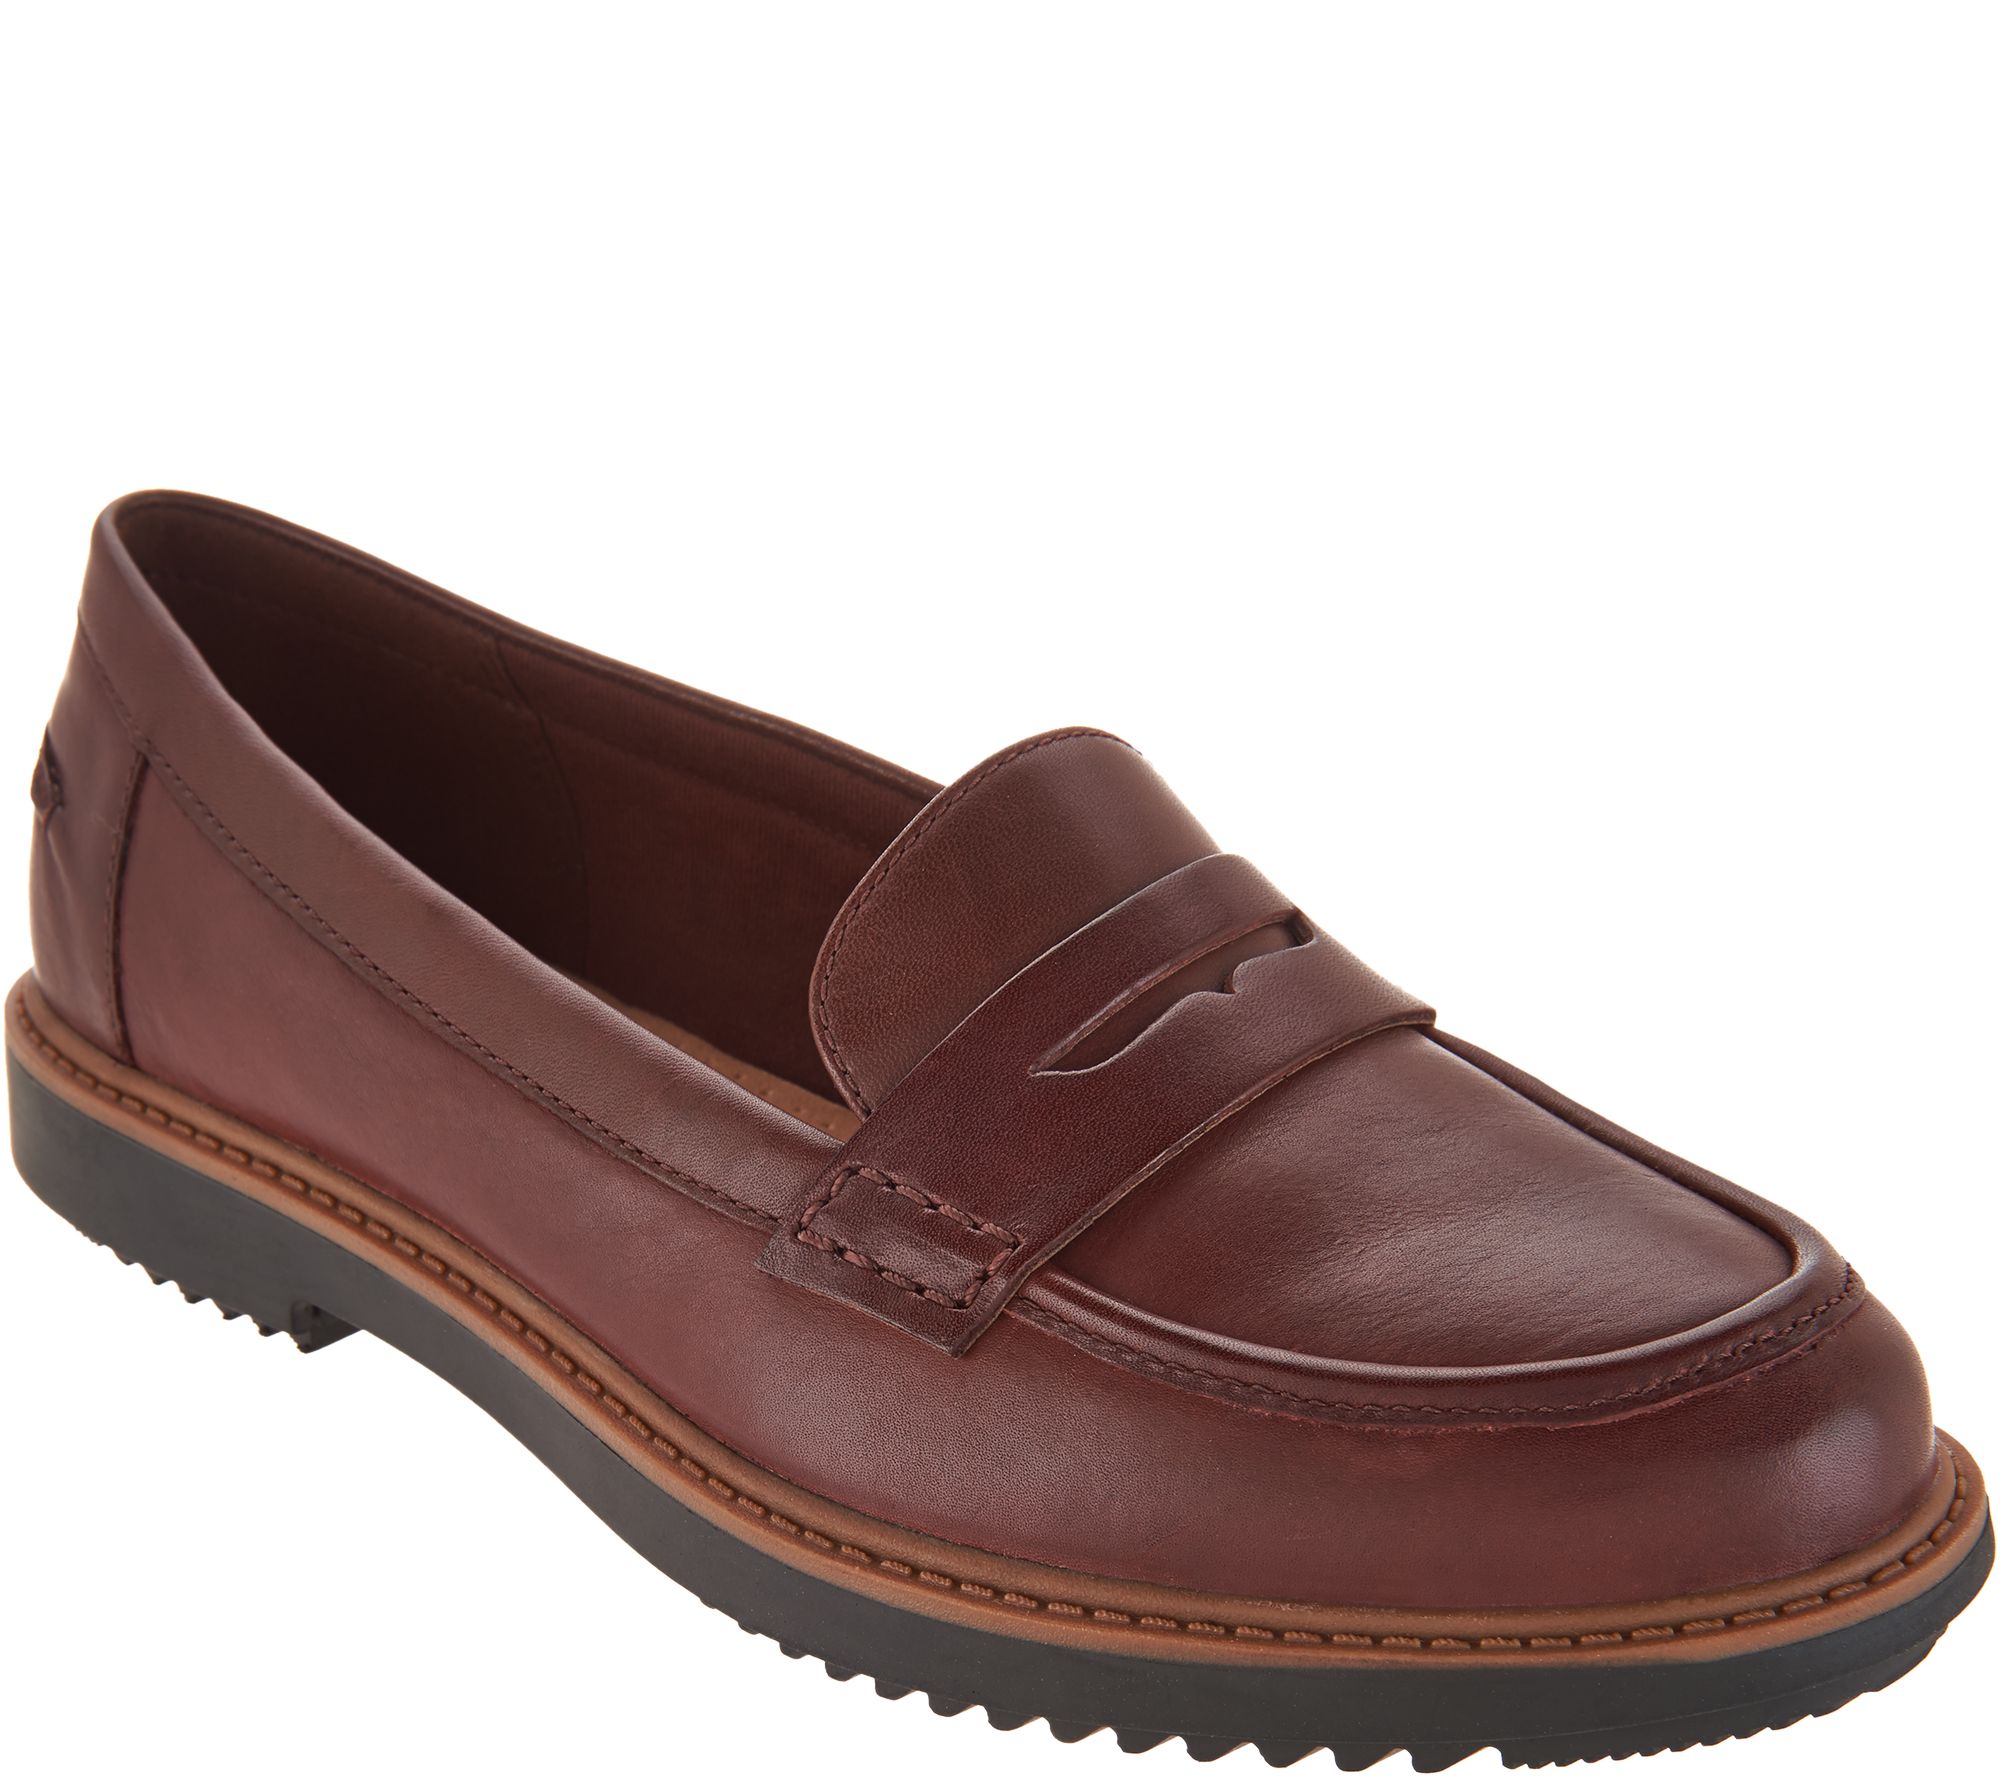 Clarks Leather Slip-on Loafers - Raisie Eletta - Page 1 — QVC.com